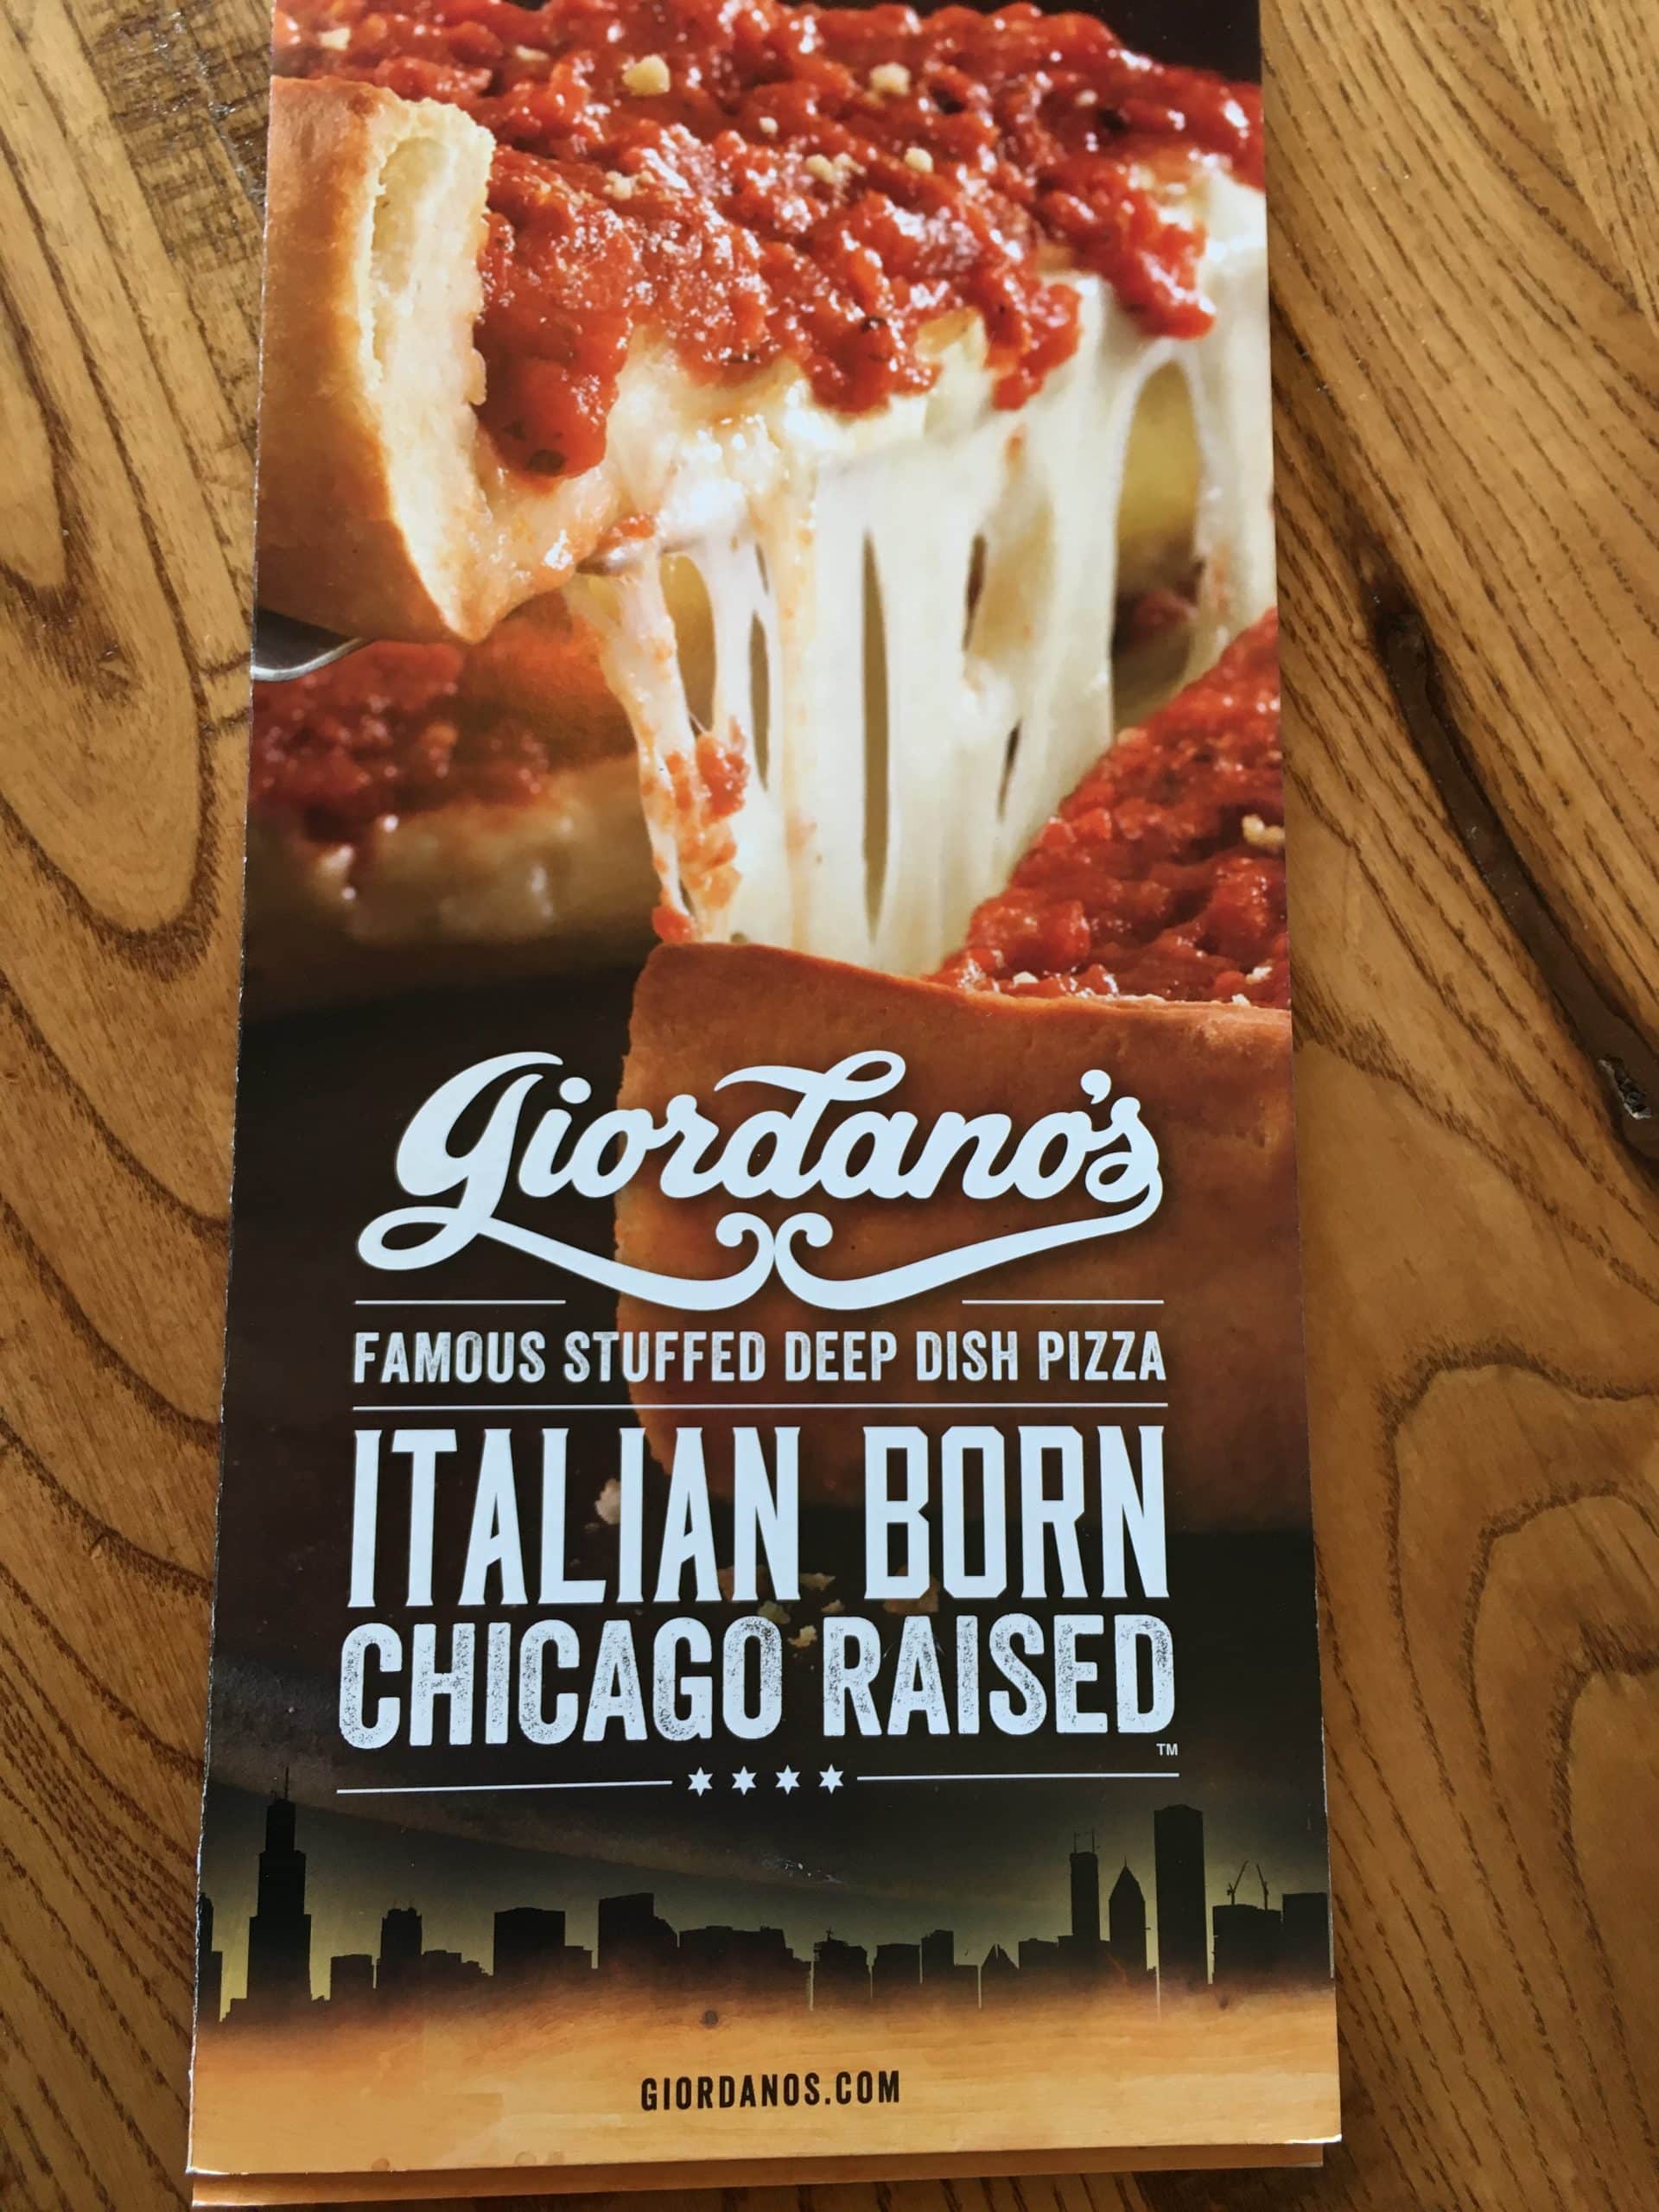 Lunch in Chicago: Giordano's Deep Dish Pizza - Paubox